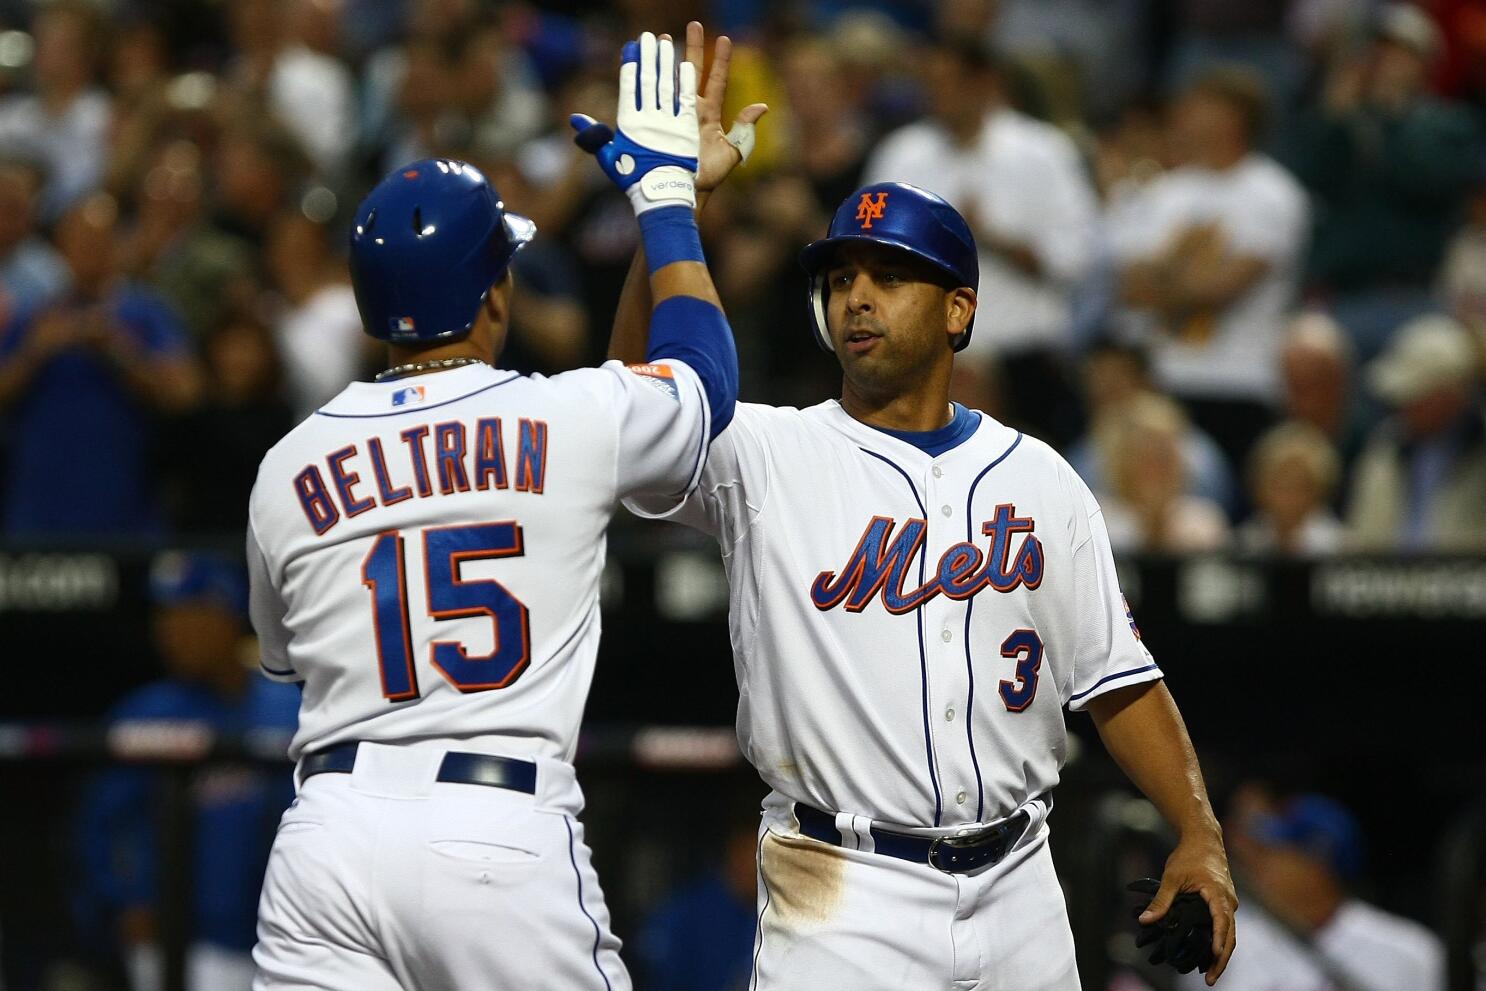 The New York Mets sign Carlos Beltran to play center field for the